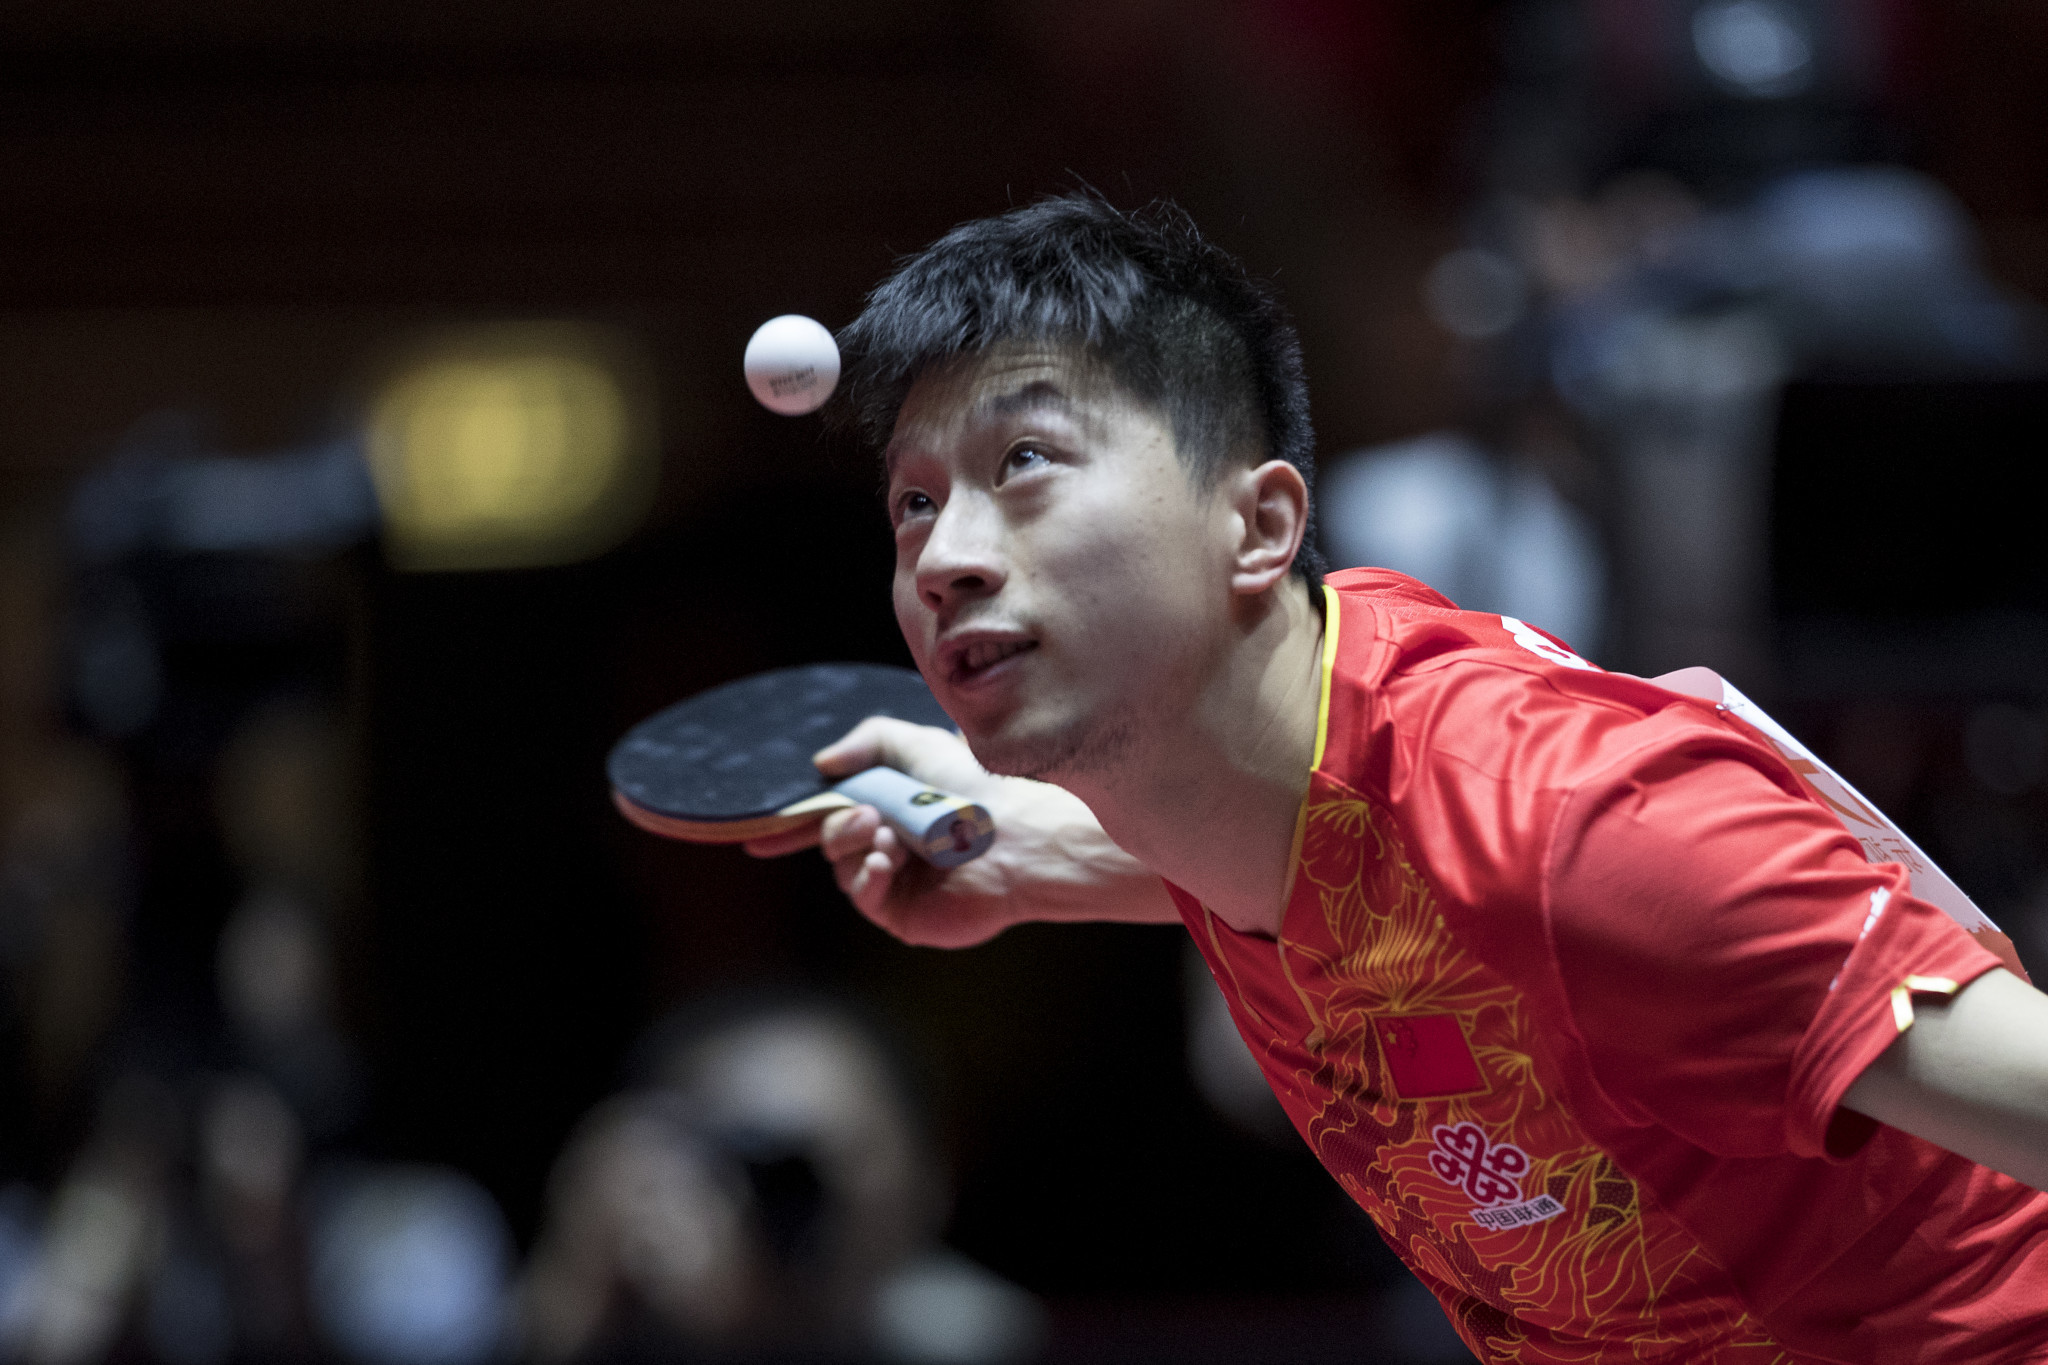 China's Ma Long won the men's singles title at the latest edition of the ITTF World Table Tennis Championships, held in German city Düsseldorf in 2017 ©Getty Images